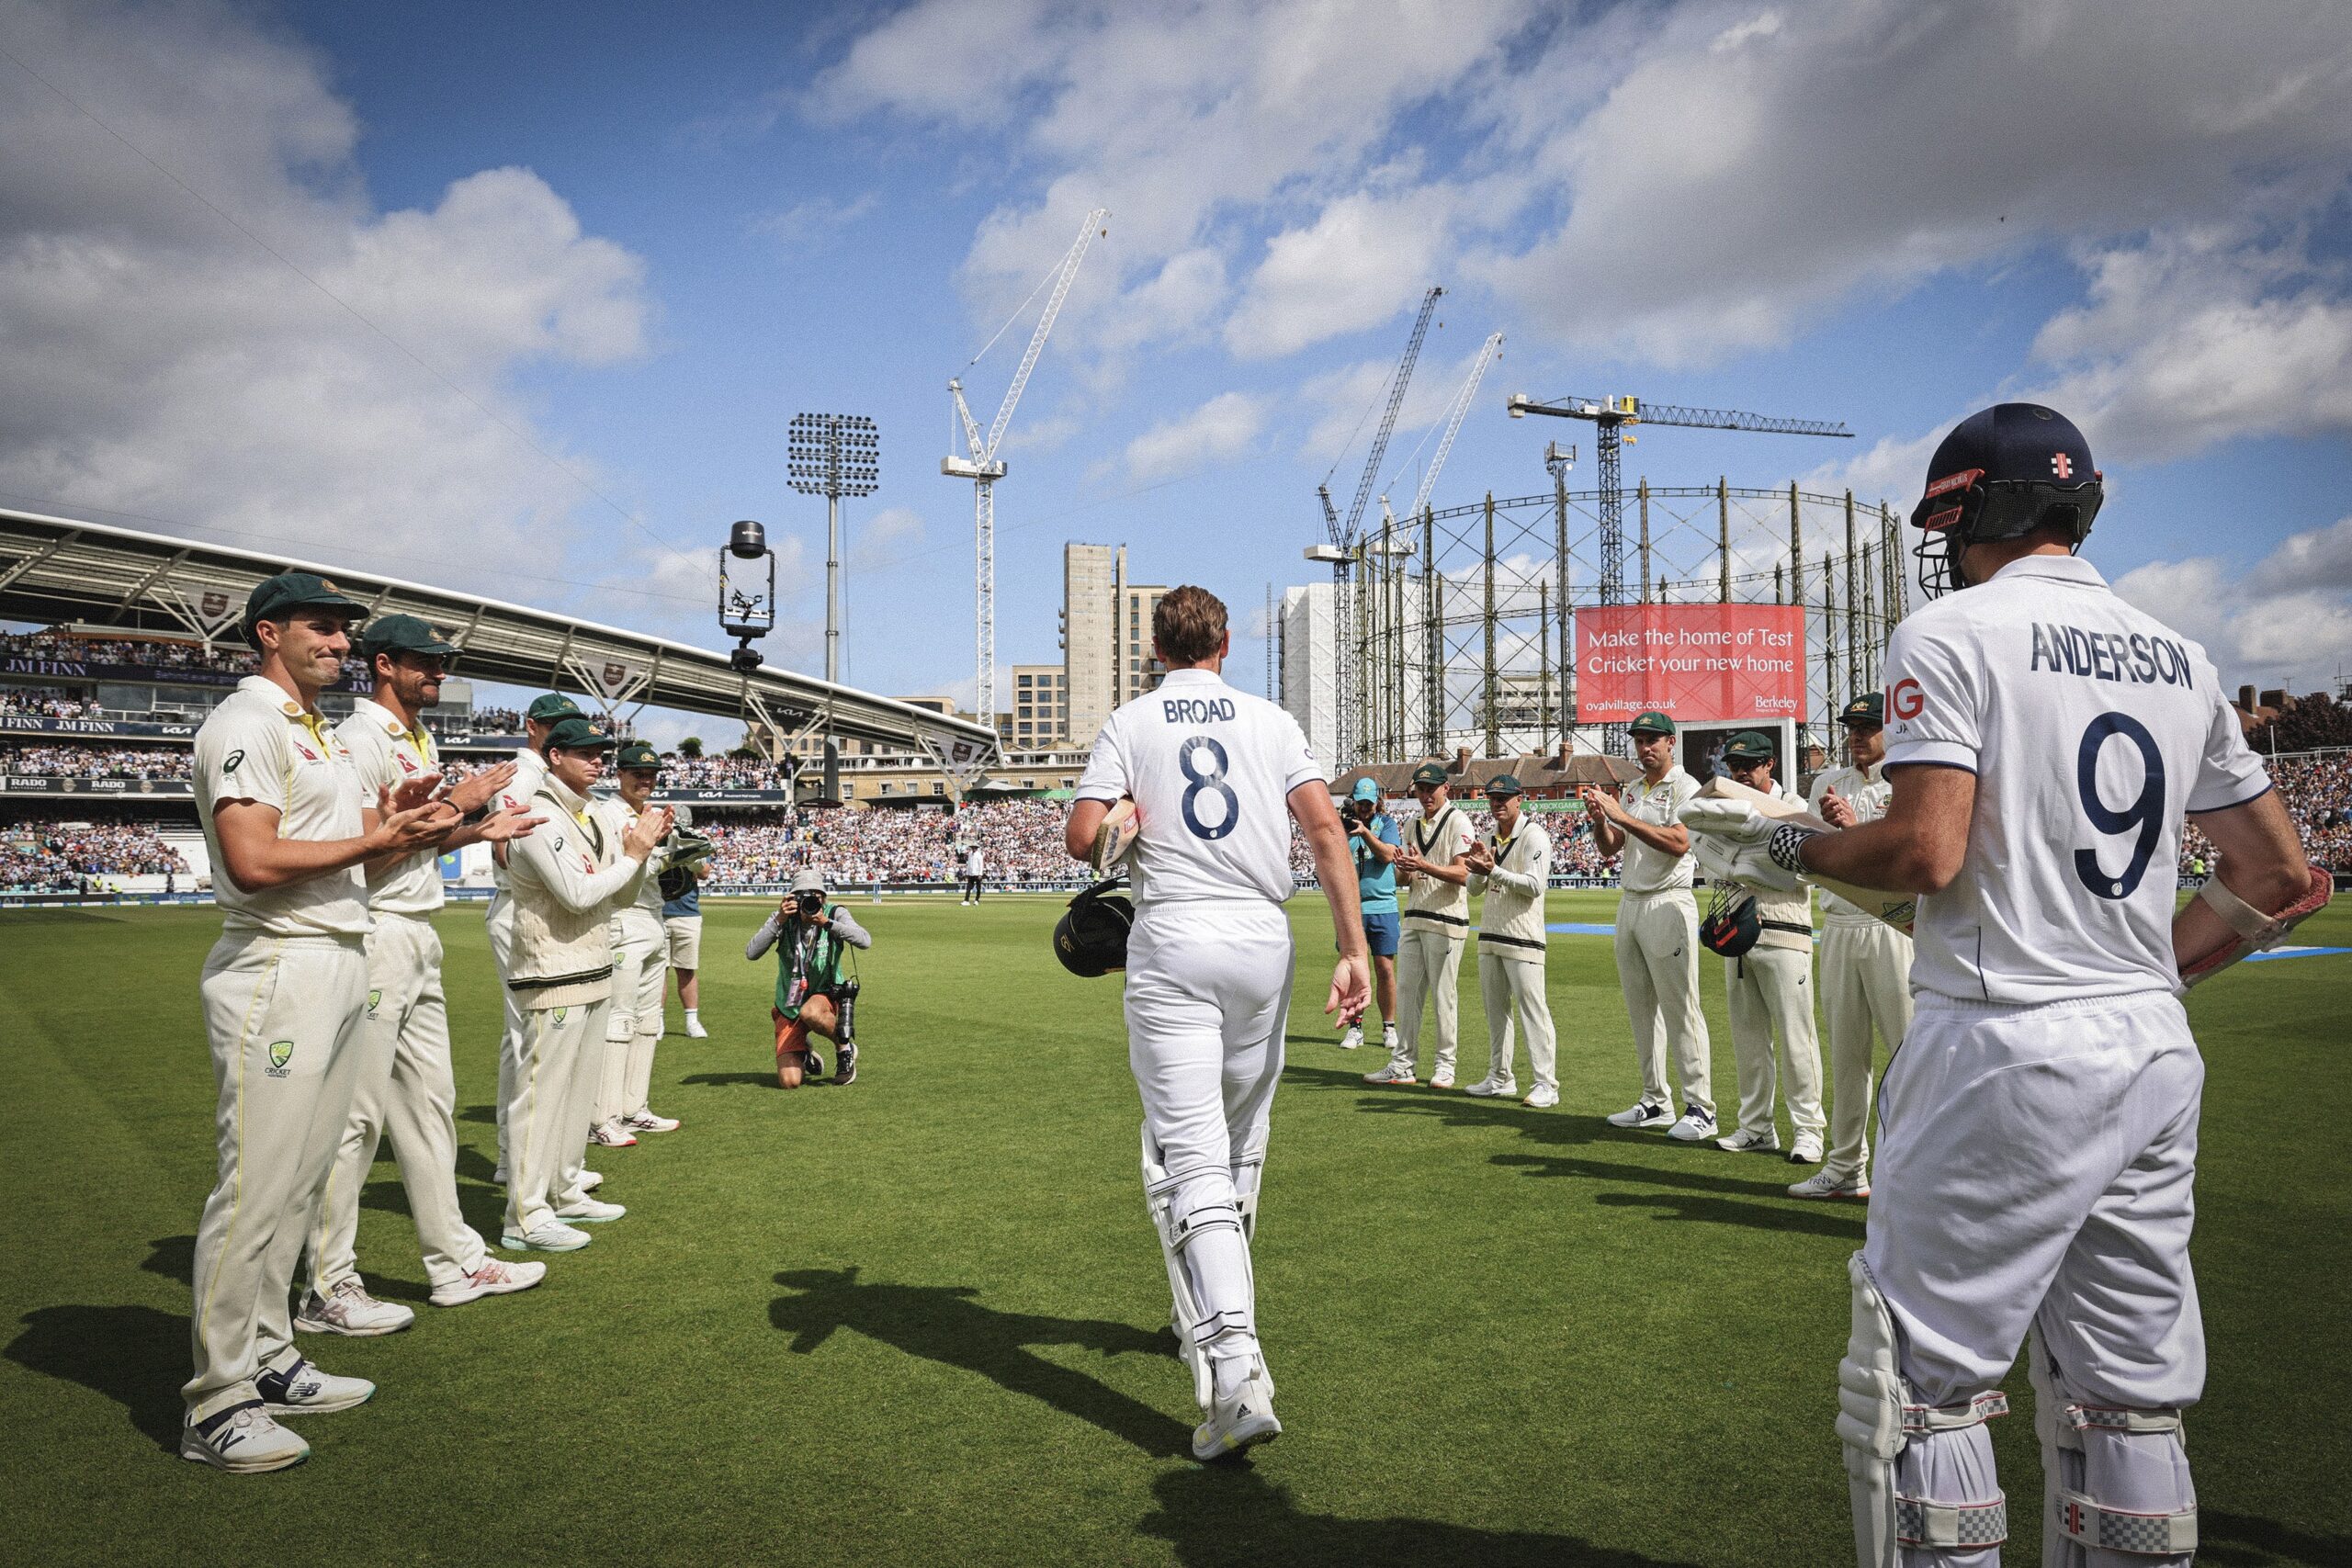 Wisden Photograph of the Year displayed at The Kia Oval